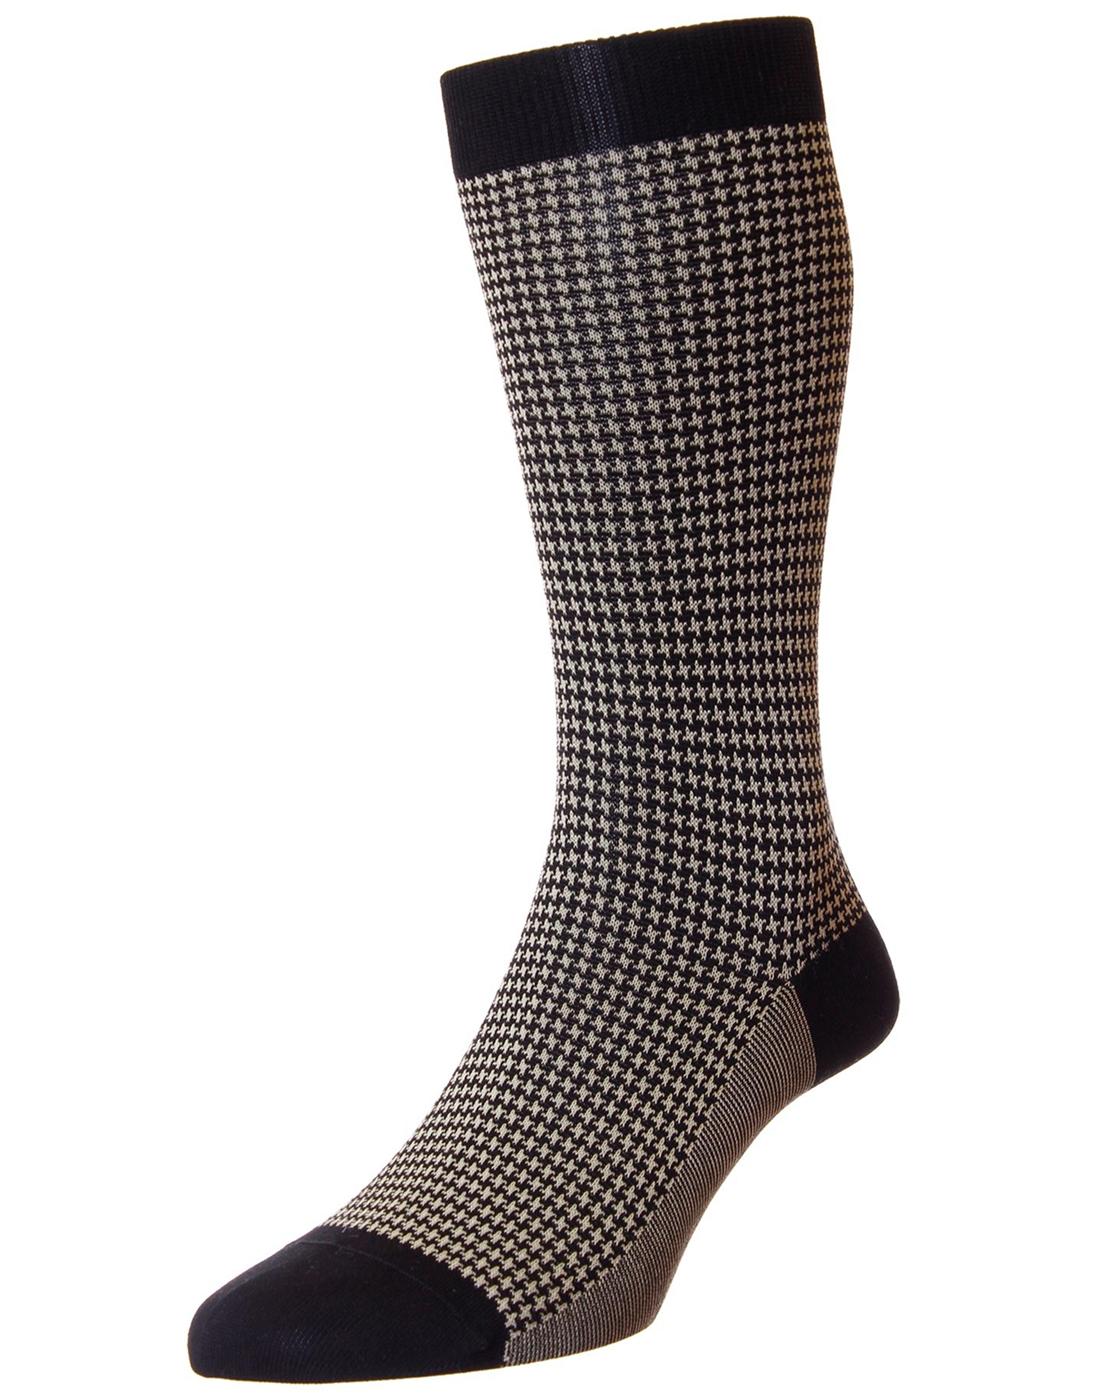 PANTHERELLA Hampstead Retro 1960s Mod Dogtooth Socks in Calico